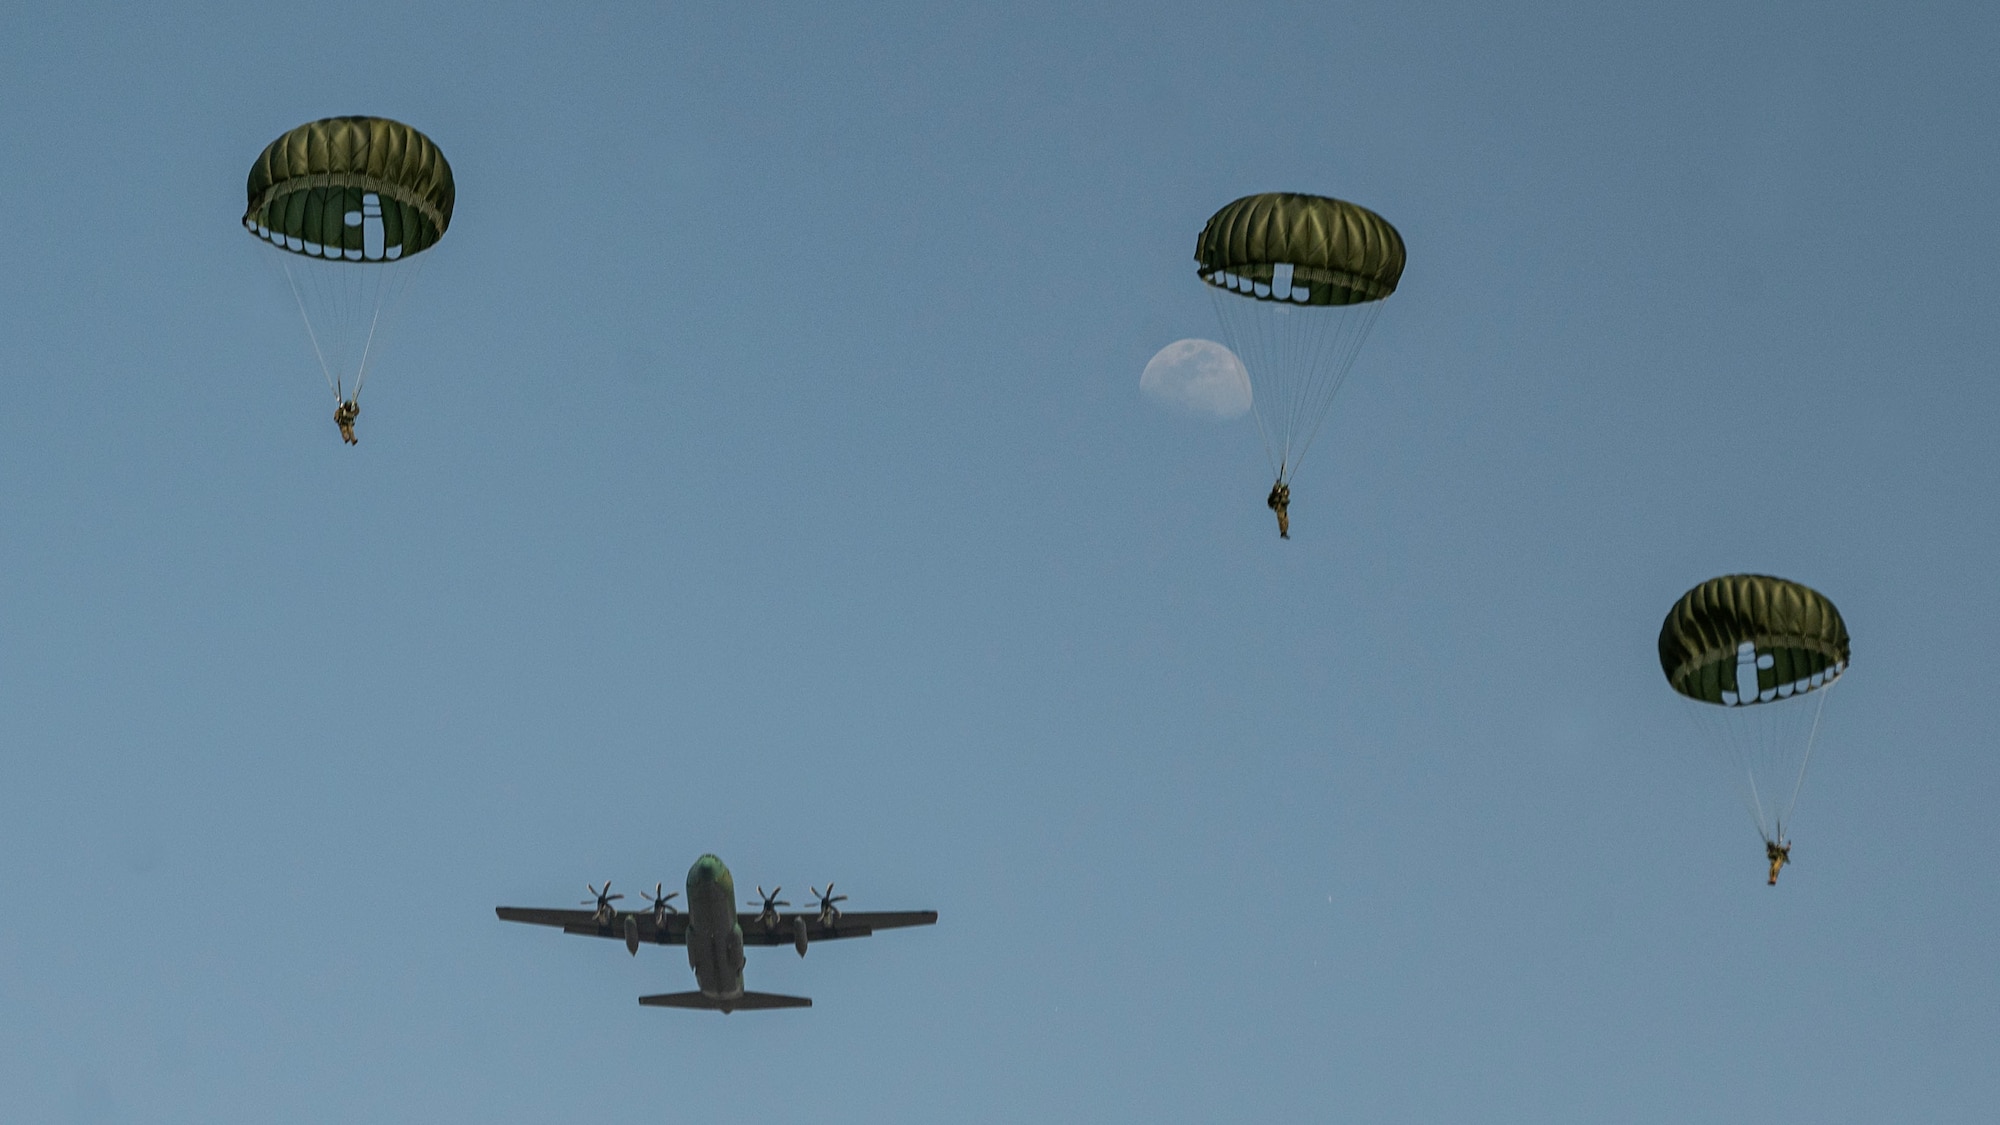 Republic of Korea and U.S. service members participate in airborne jump training during Korea Flight Training 24 at Osan Air Base, ROK, April 18, 2024. This training focused on improving interoperability and combat preparation in the Indo-Pacific region, while building local partnerships between U.S.-ROK forces at Osan. (U.S. Air Force photo by Staff Sgt. Aubree Owens)